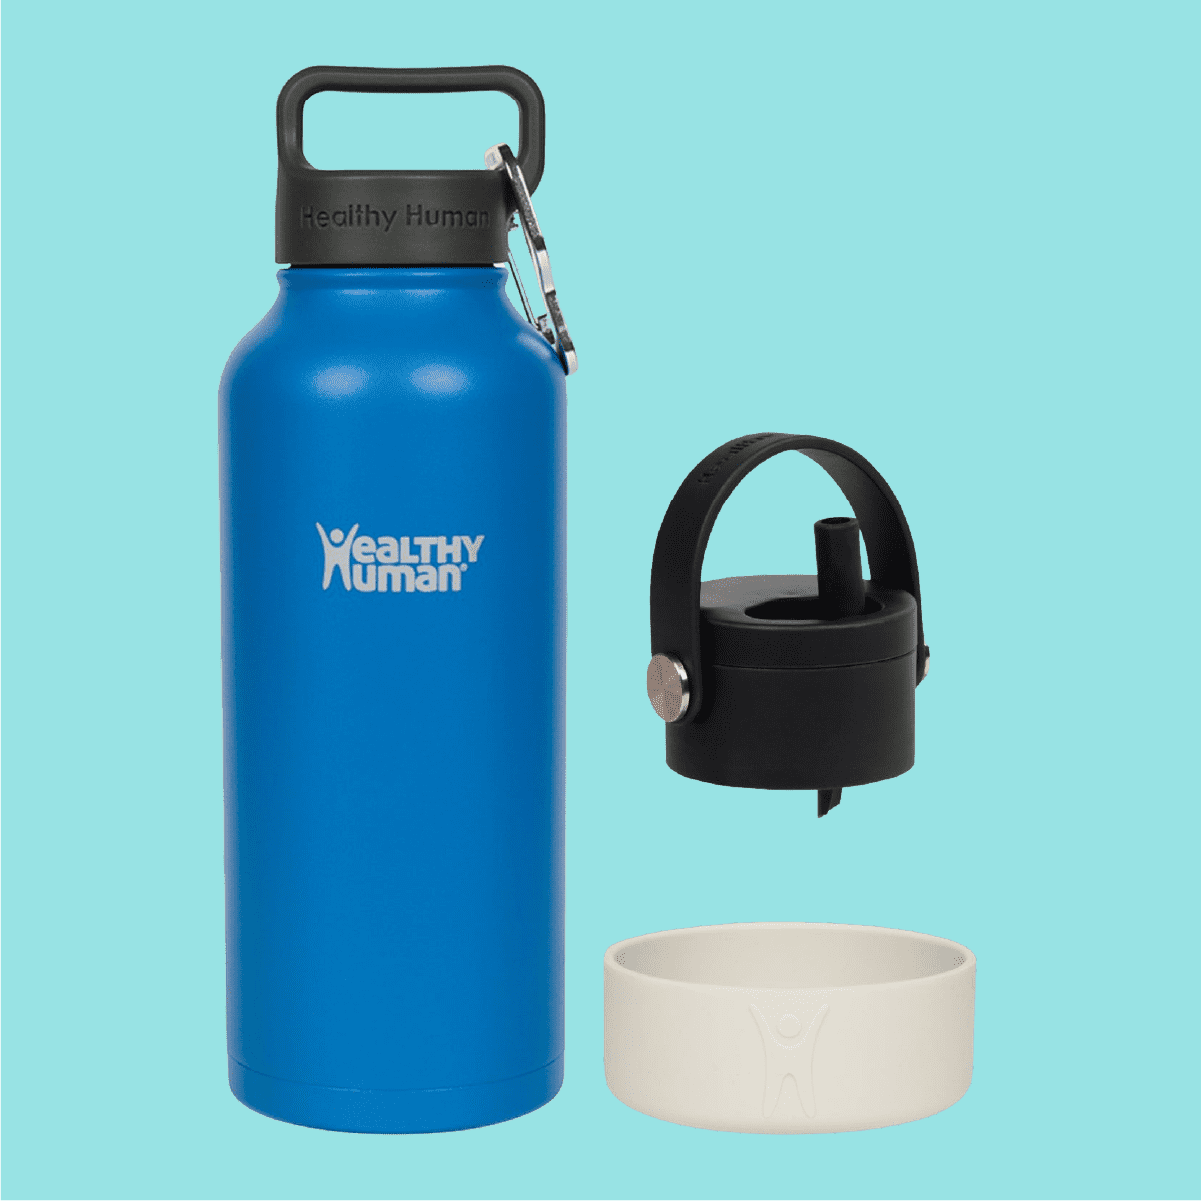 The Best Ways to Clean a Metal Water Bottle